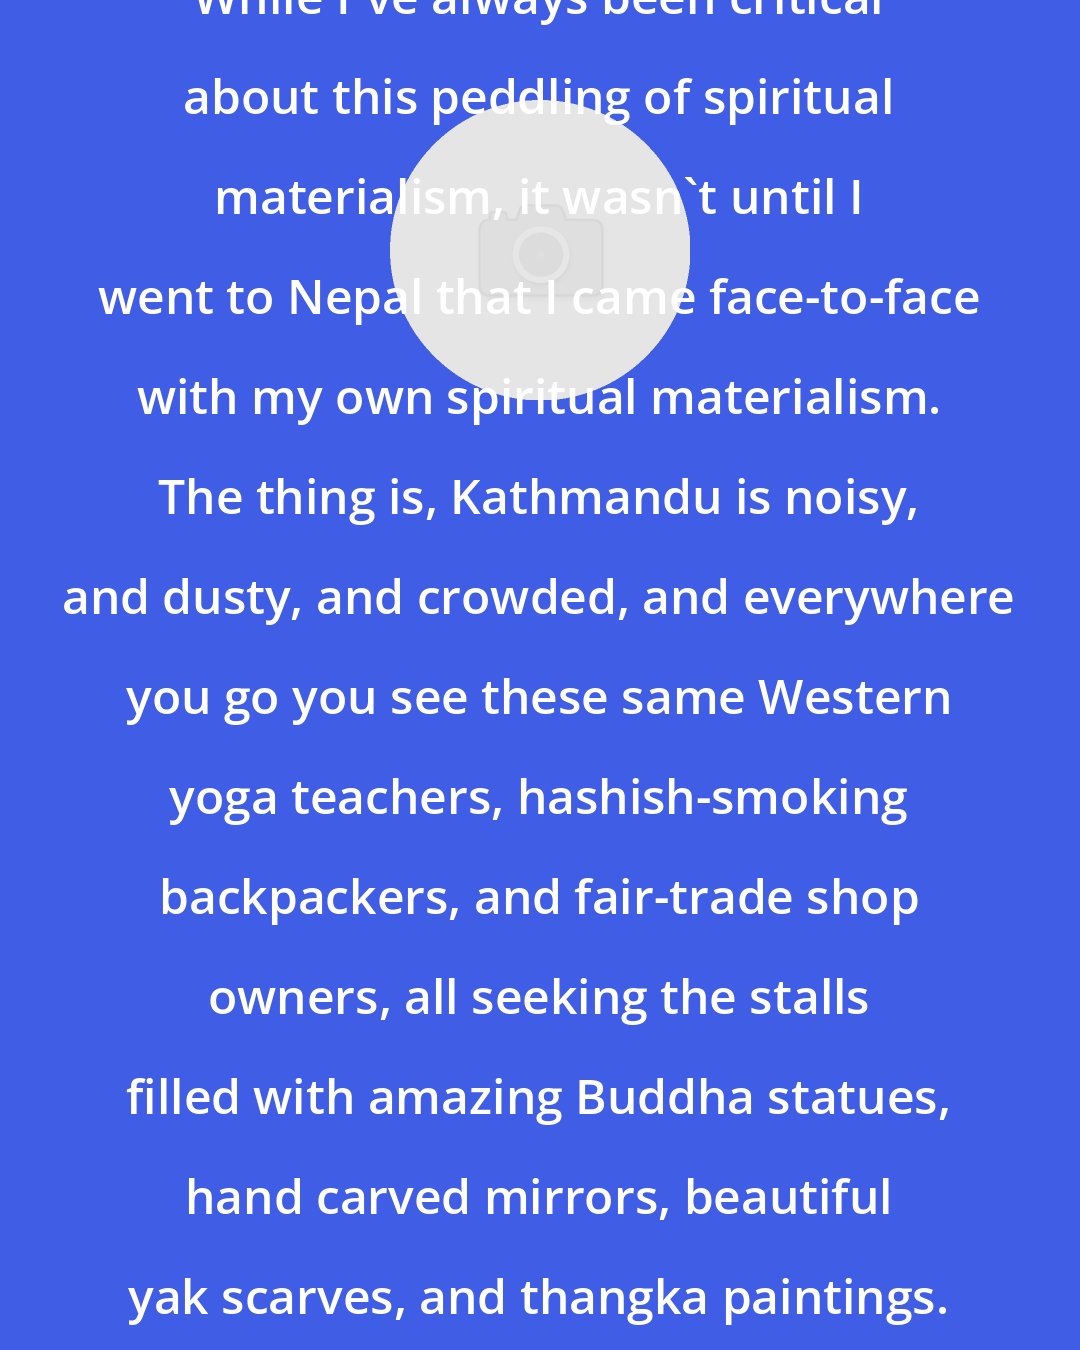 Alexander Weinstein: While I've always been critical about this peddling of spiritual materialism, it wasn't until I went to Nepal that I came face-to-face with my own spiritual materialism. The thing is, Kathmandu is noisy, and dusty, and crowded, and everywhere you go you see these same Western yoga teachers, hashish-smoking backpackers, and fair-trade shop owners, all seeking the stalls filled with amazing Buddha statues, hand carved mirrors, beautiful yak scarves, and thangka paintings. And everyone is buying stuff!